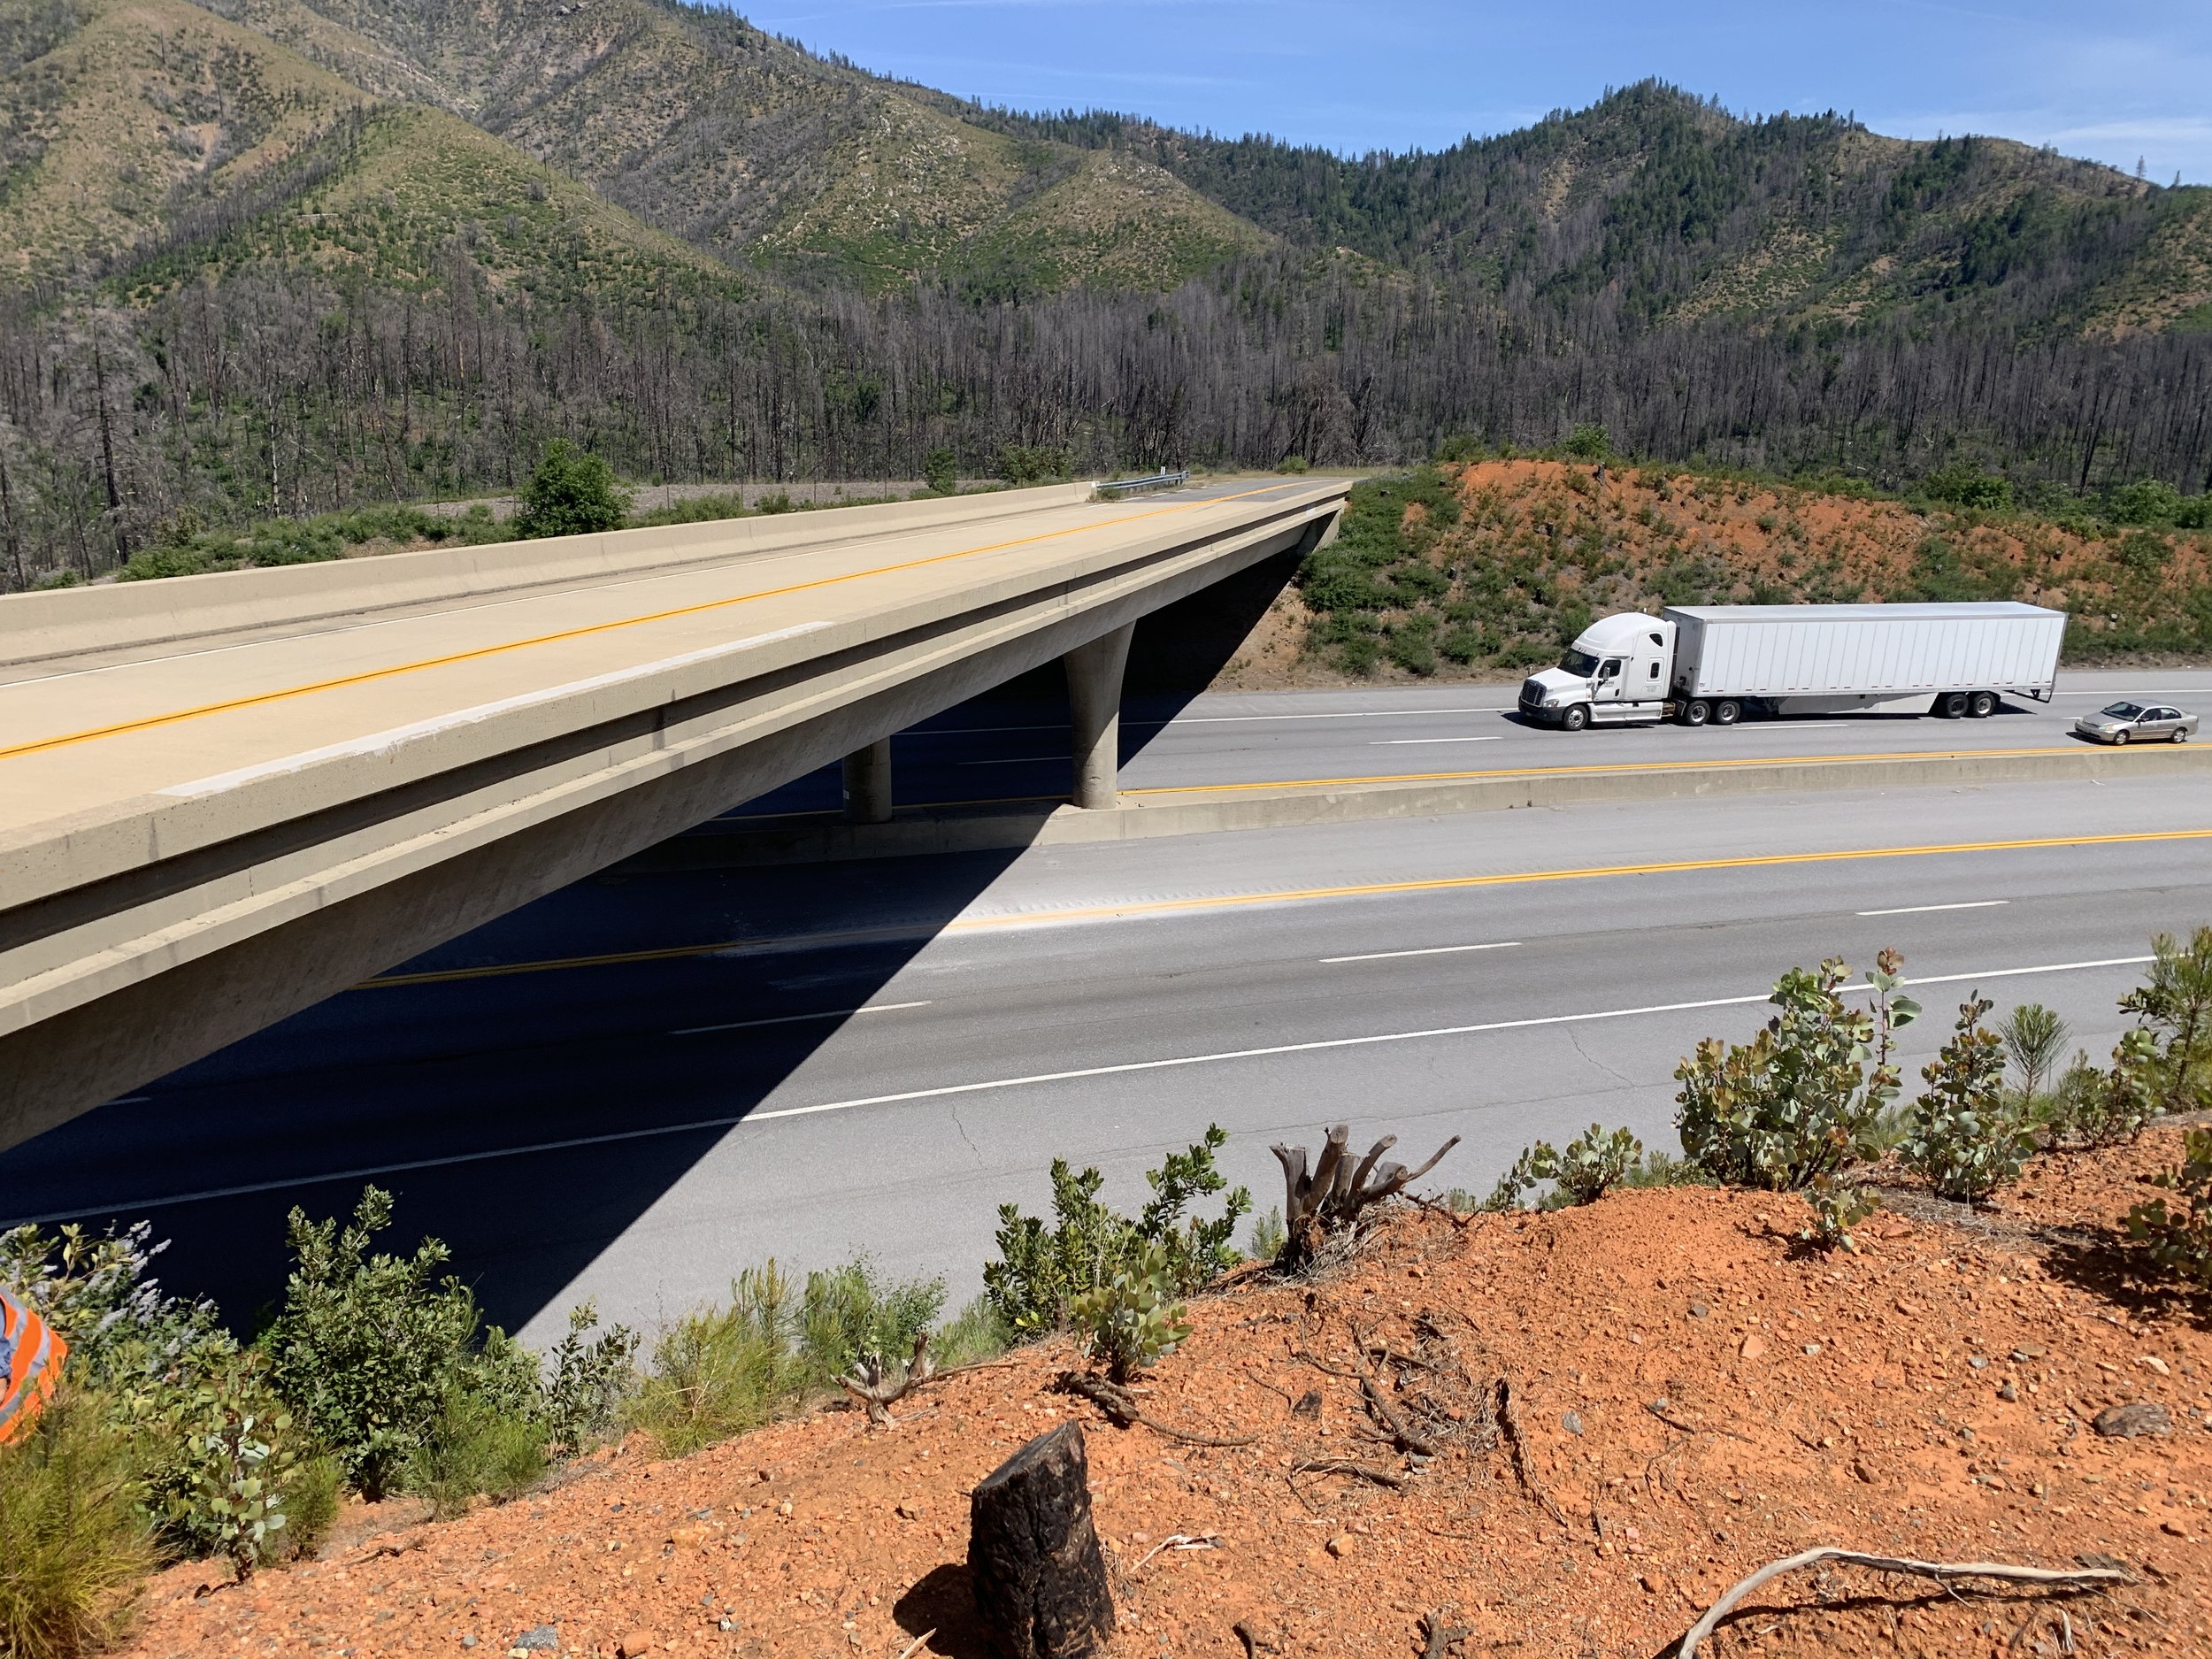  Not only did we explore ways to reduce wildlife-vehicle collisions along I-5—we also considered how road enhancements could increase connectivity throughout the landscape. 